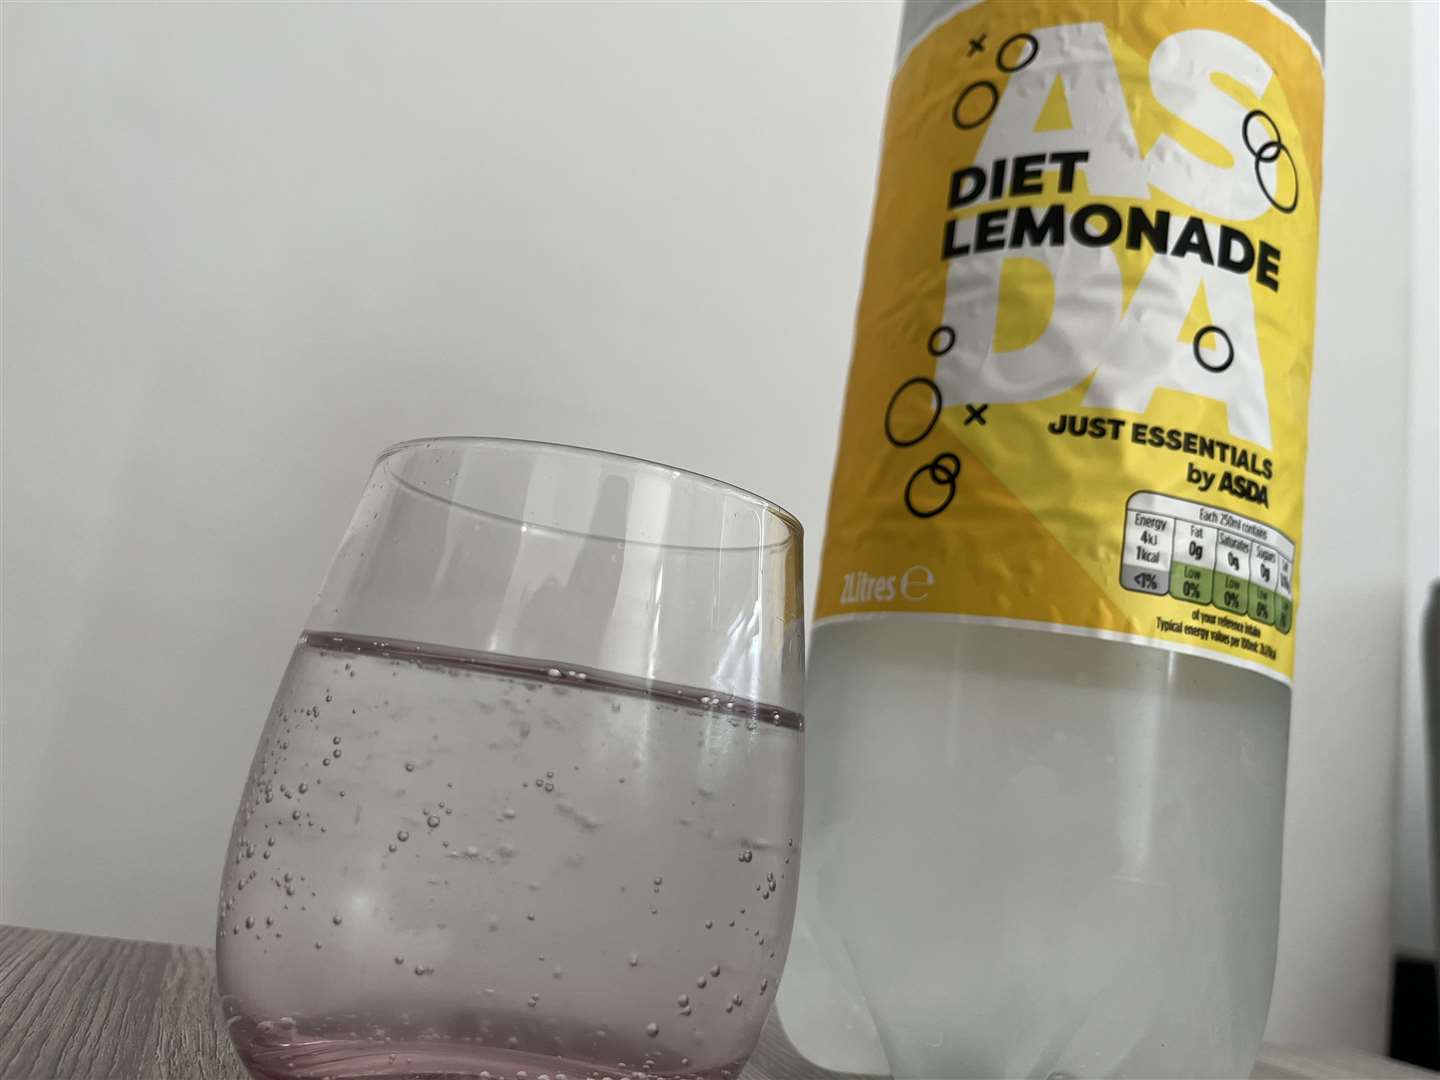 The diet lemonade costing 26p was a decent and refreshing drink